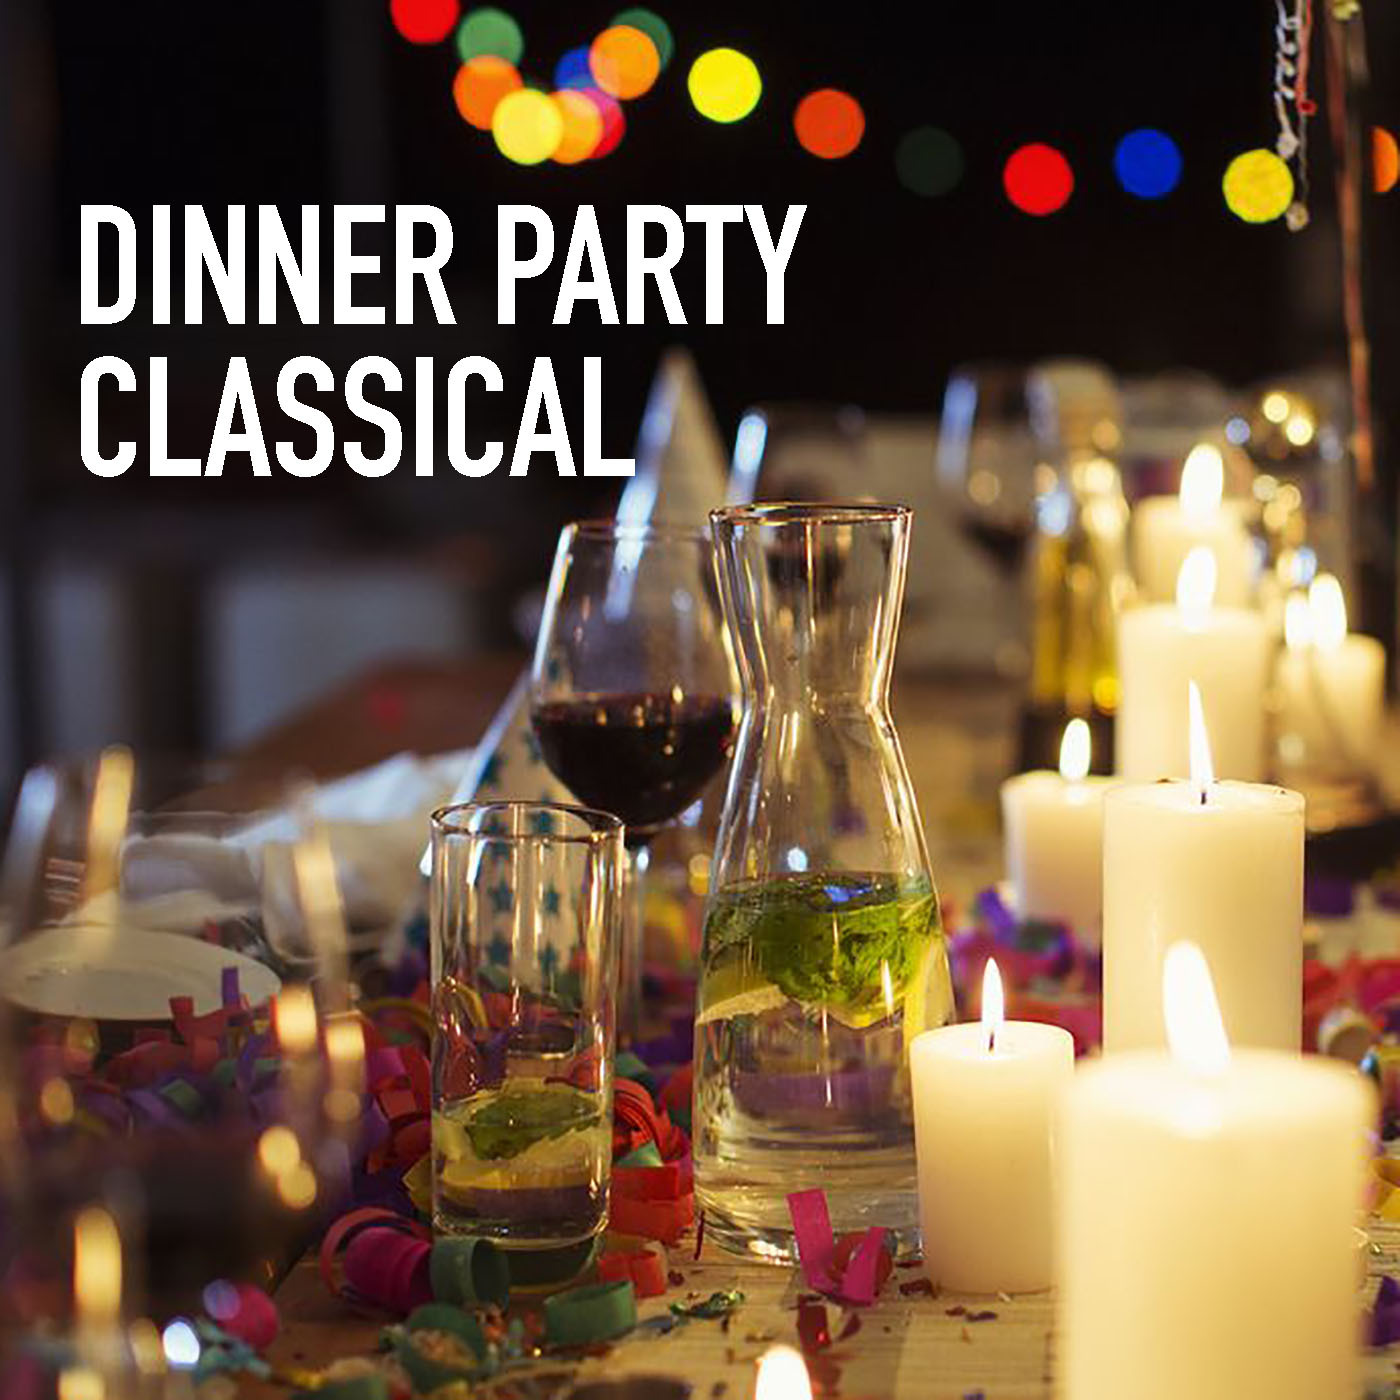 Dinner Party Classical